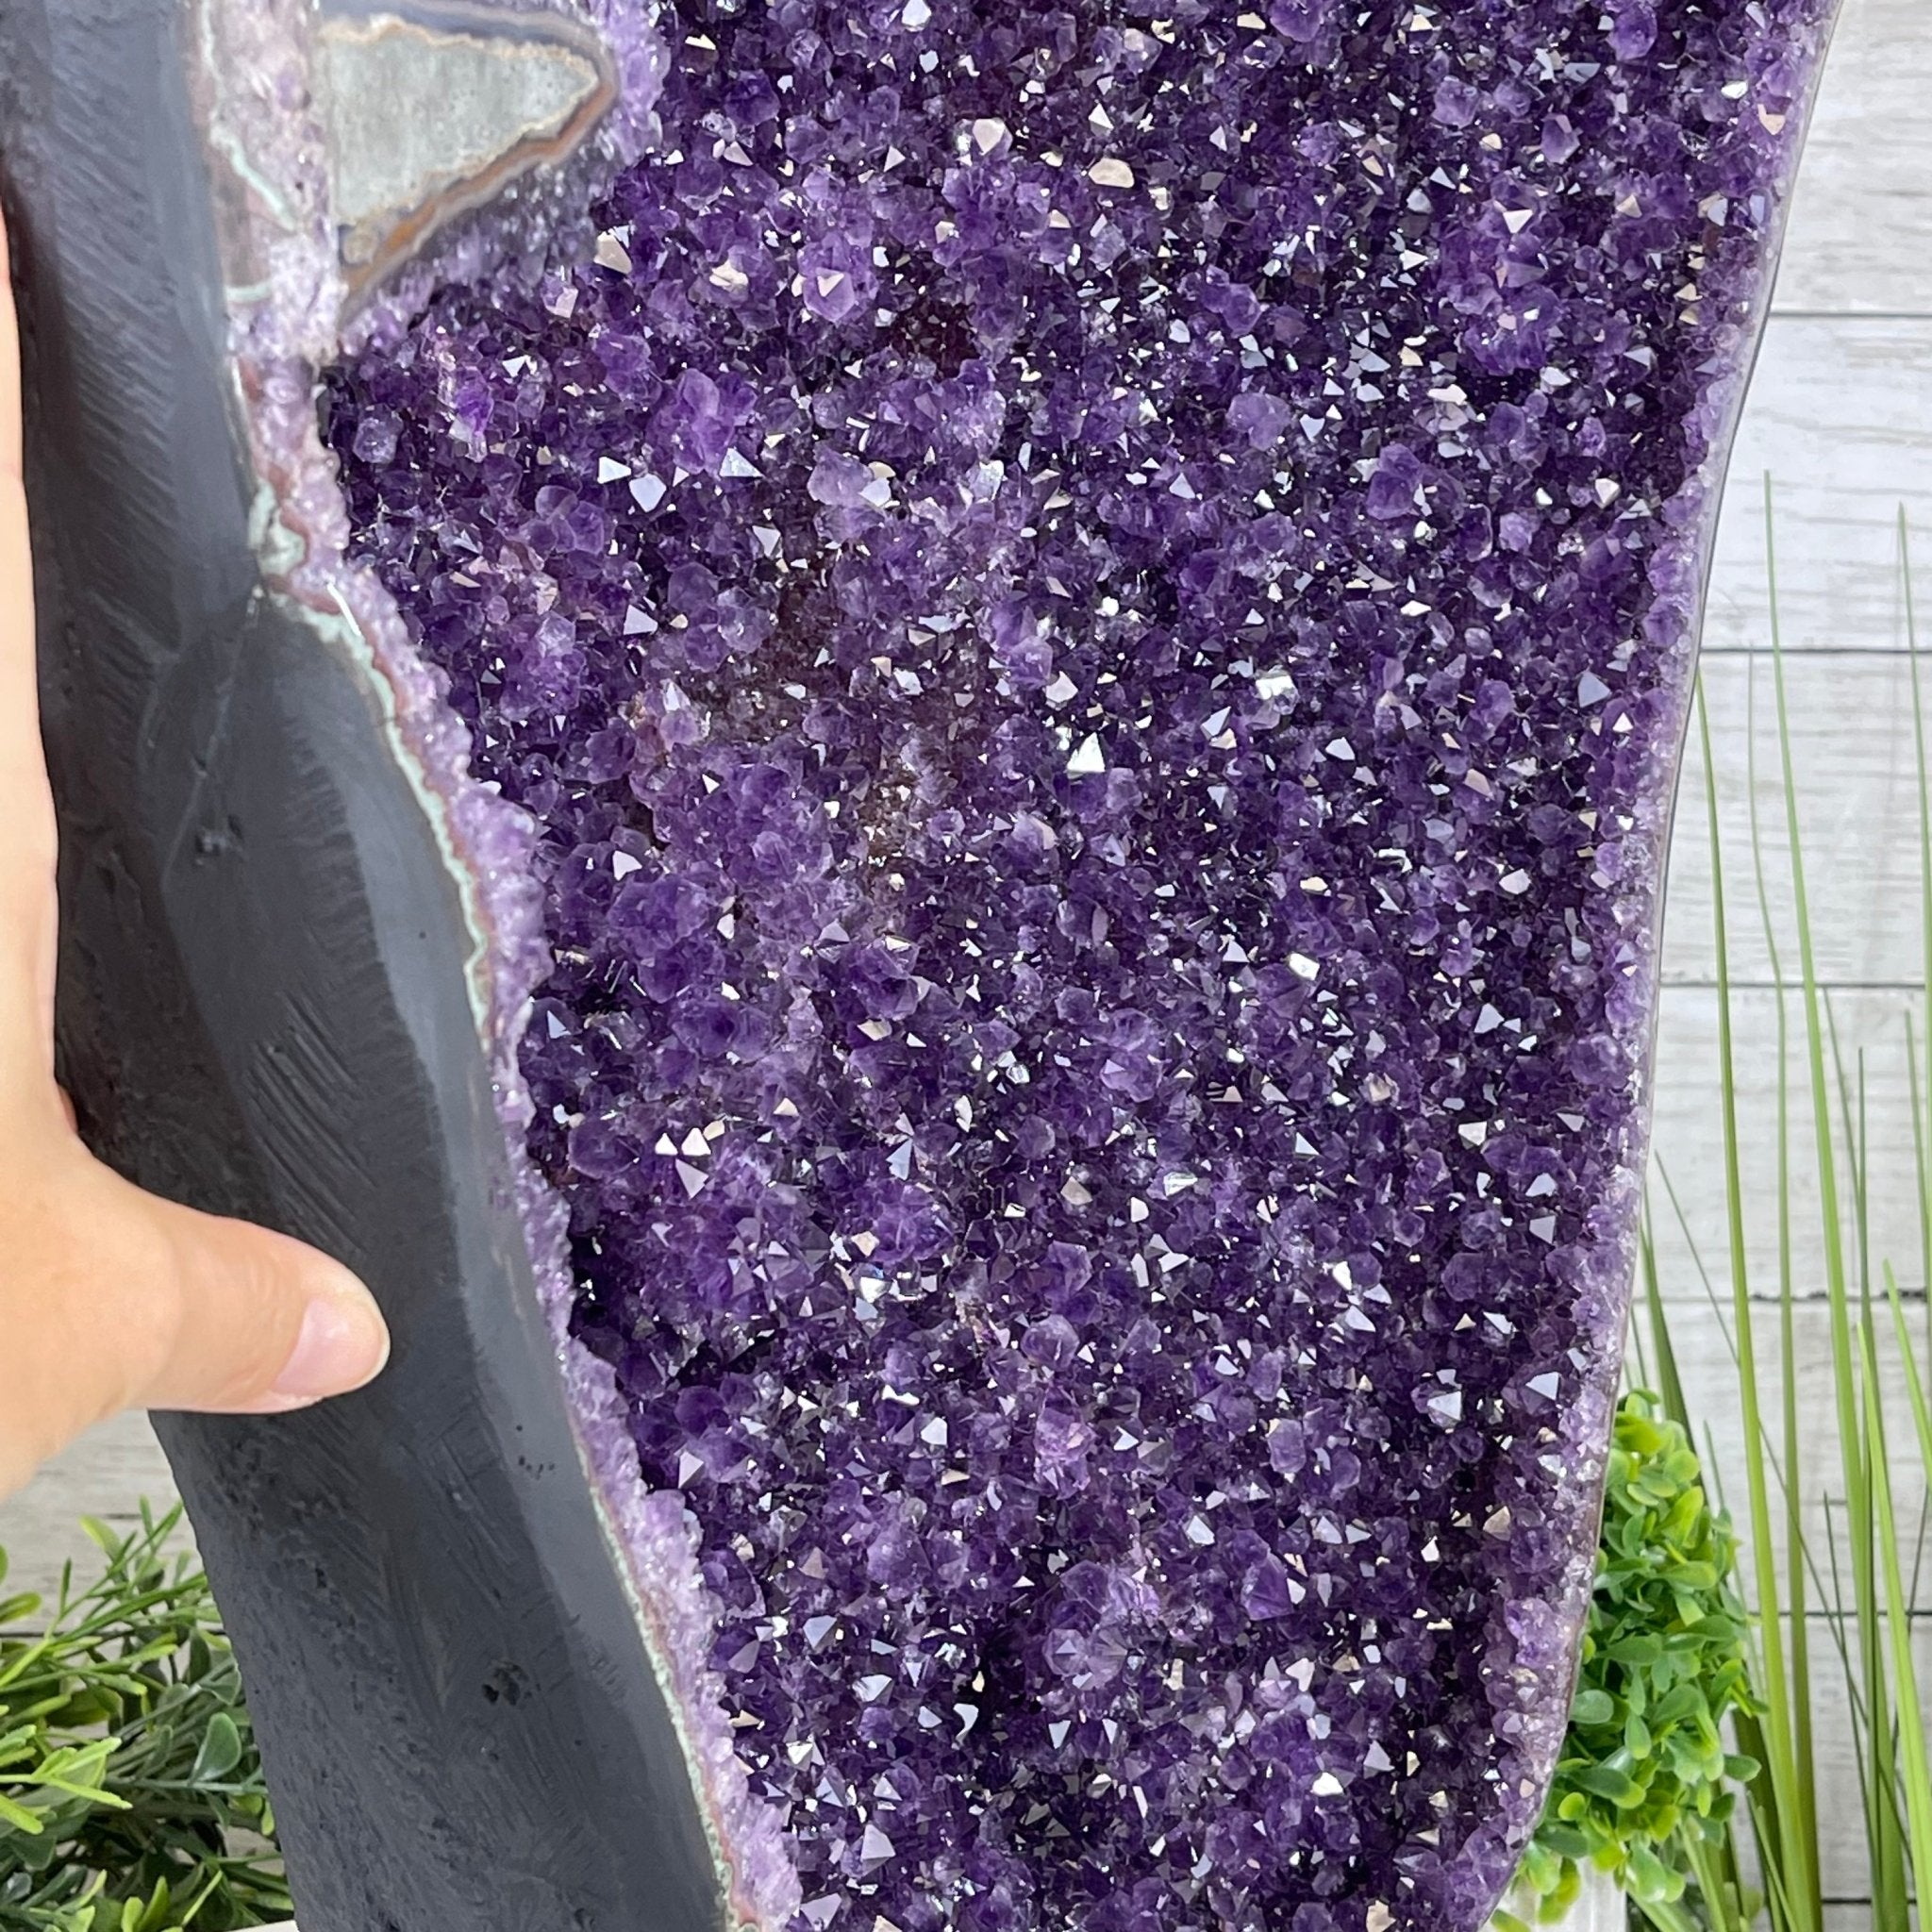 Super Quality Amethyst Druse Cluster on Cement Base, 28" Tall Model #5614-0064 by Brazil Gems - Brazil GemsBrazil GemsSuper Quality Amethyst Druse Cluster on Cement Base, 28" Tall Model #5614-0064 by Brazil GemsClusters on Cement Bases5614-0064